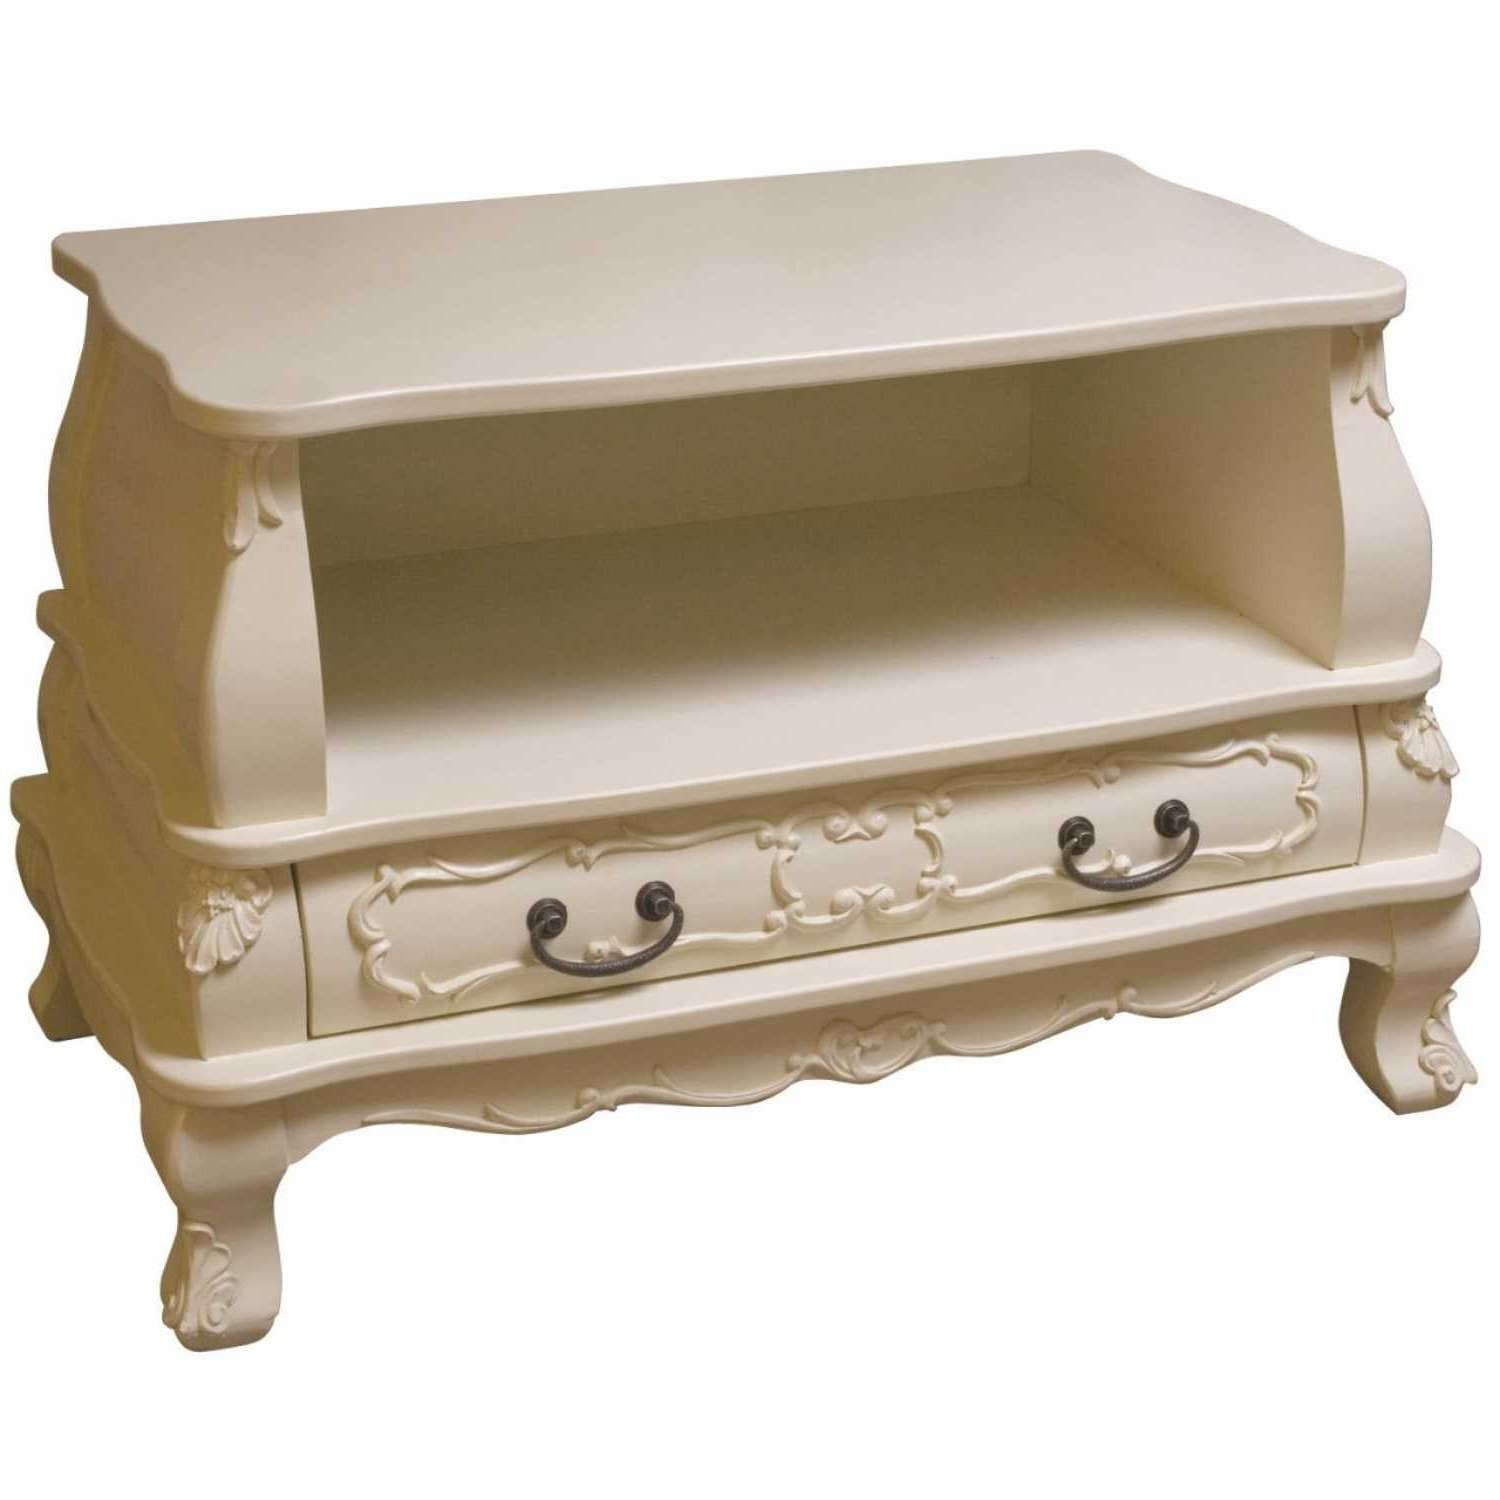 Shabby Chic Cream Painted Brittany Tv Cabinet Intended For Cream Tv Cabinets (View 3 of 20)